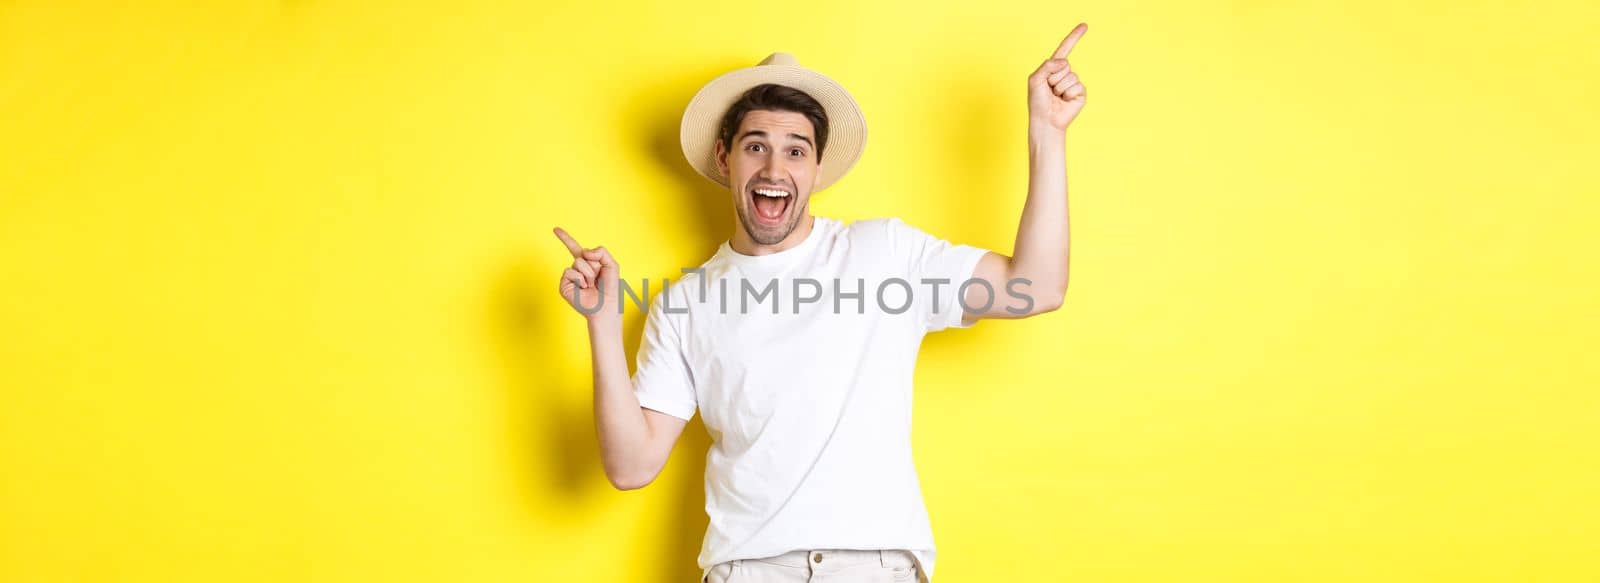 Concept of tourism and lifestyle. Happy tourist dancing and pointing fingers sideways, showing vacation variants, yellow background.